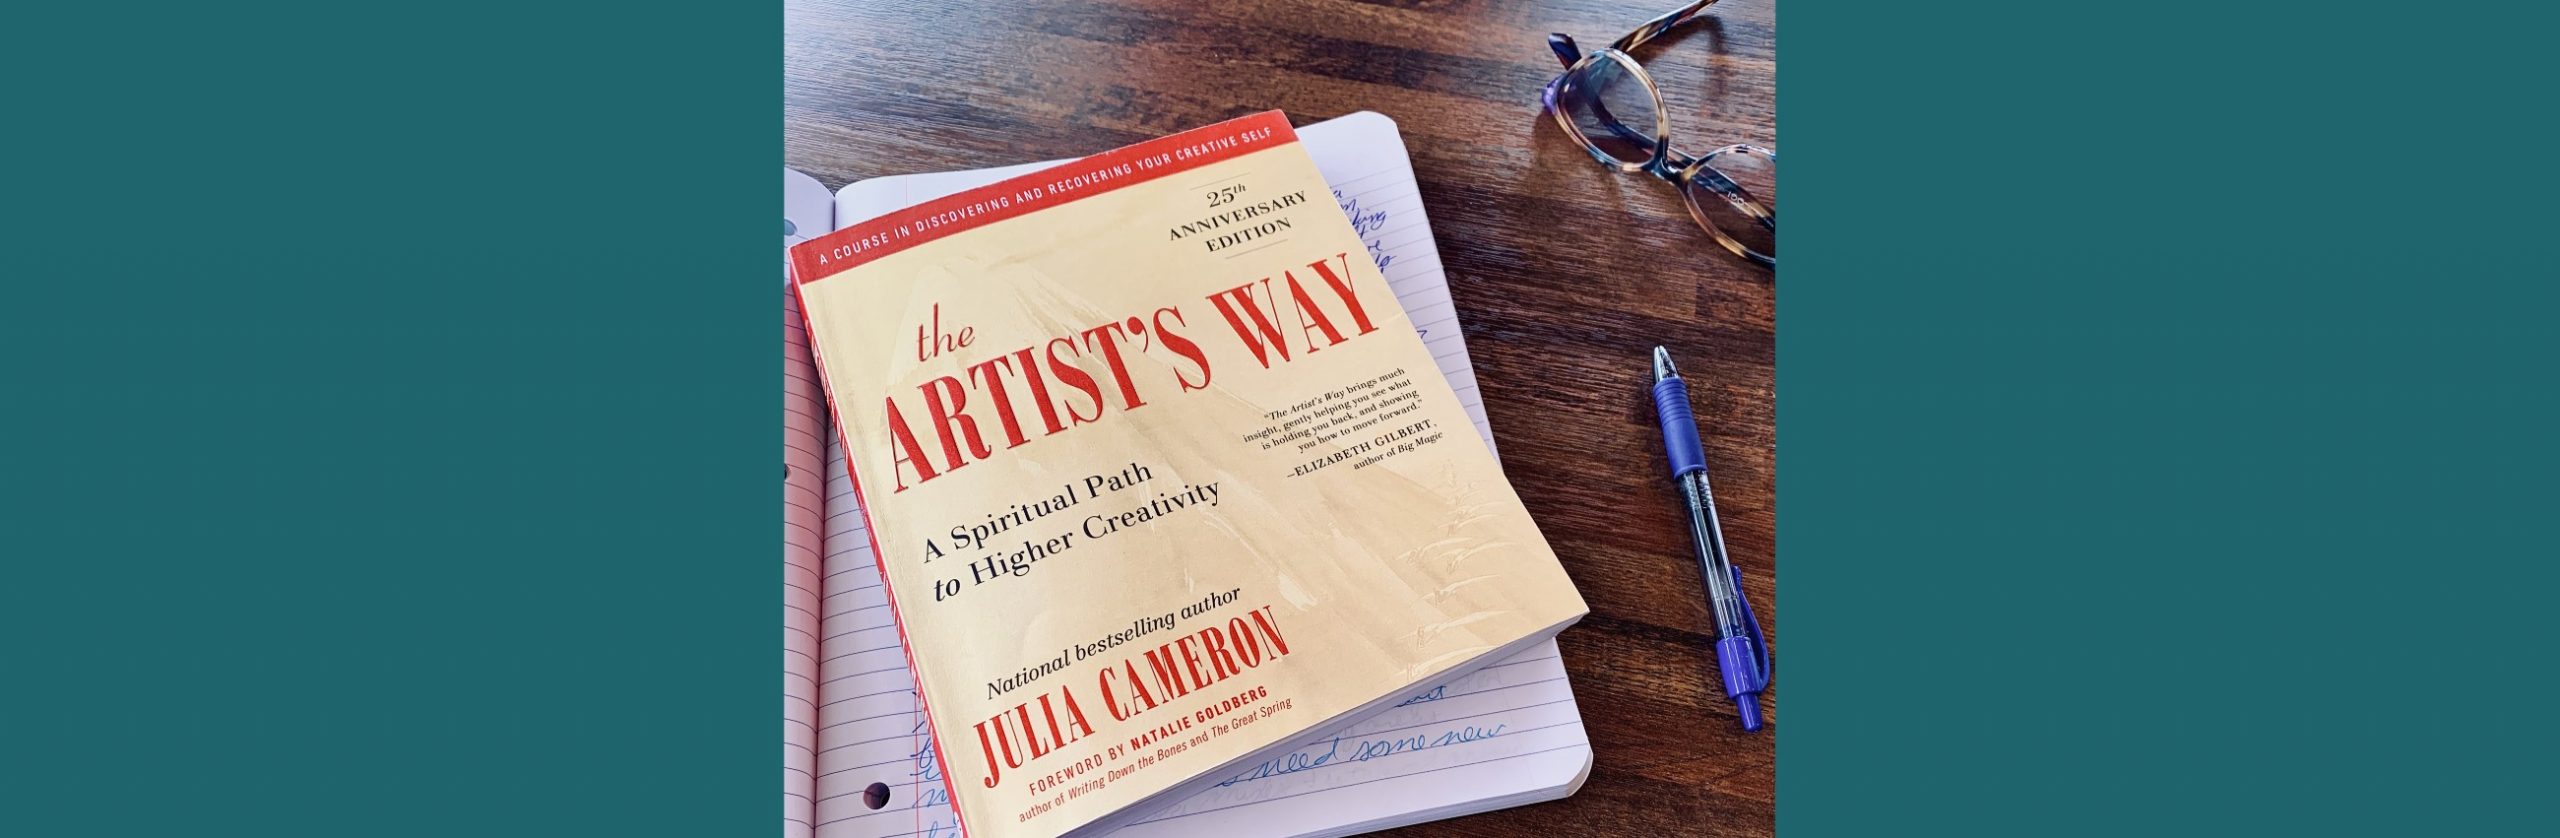 The Artist's Way book lays on an open notebook next to a blue pen and a pair of glasses